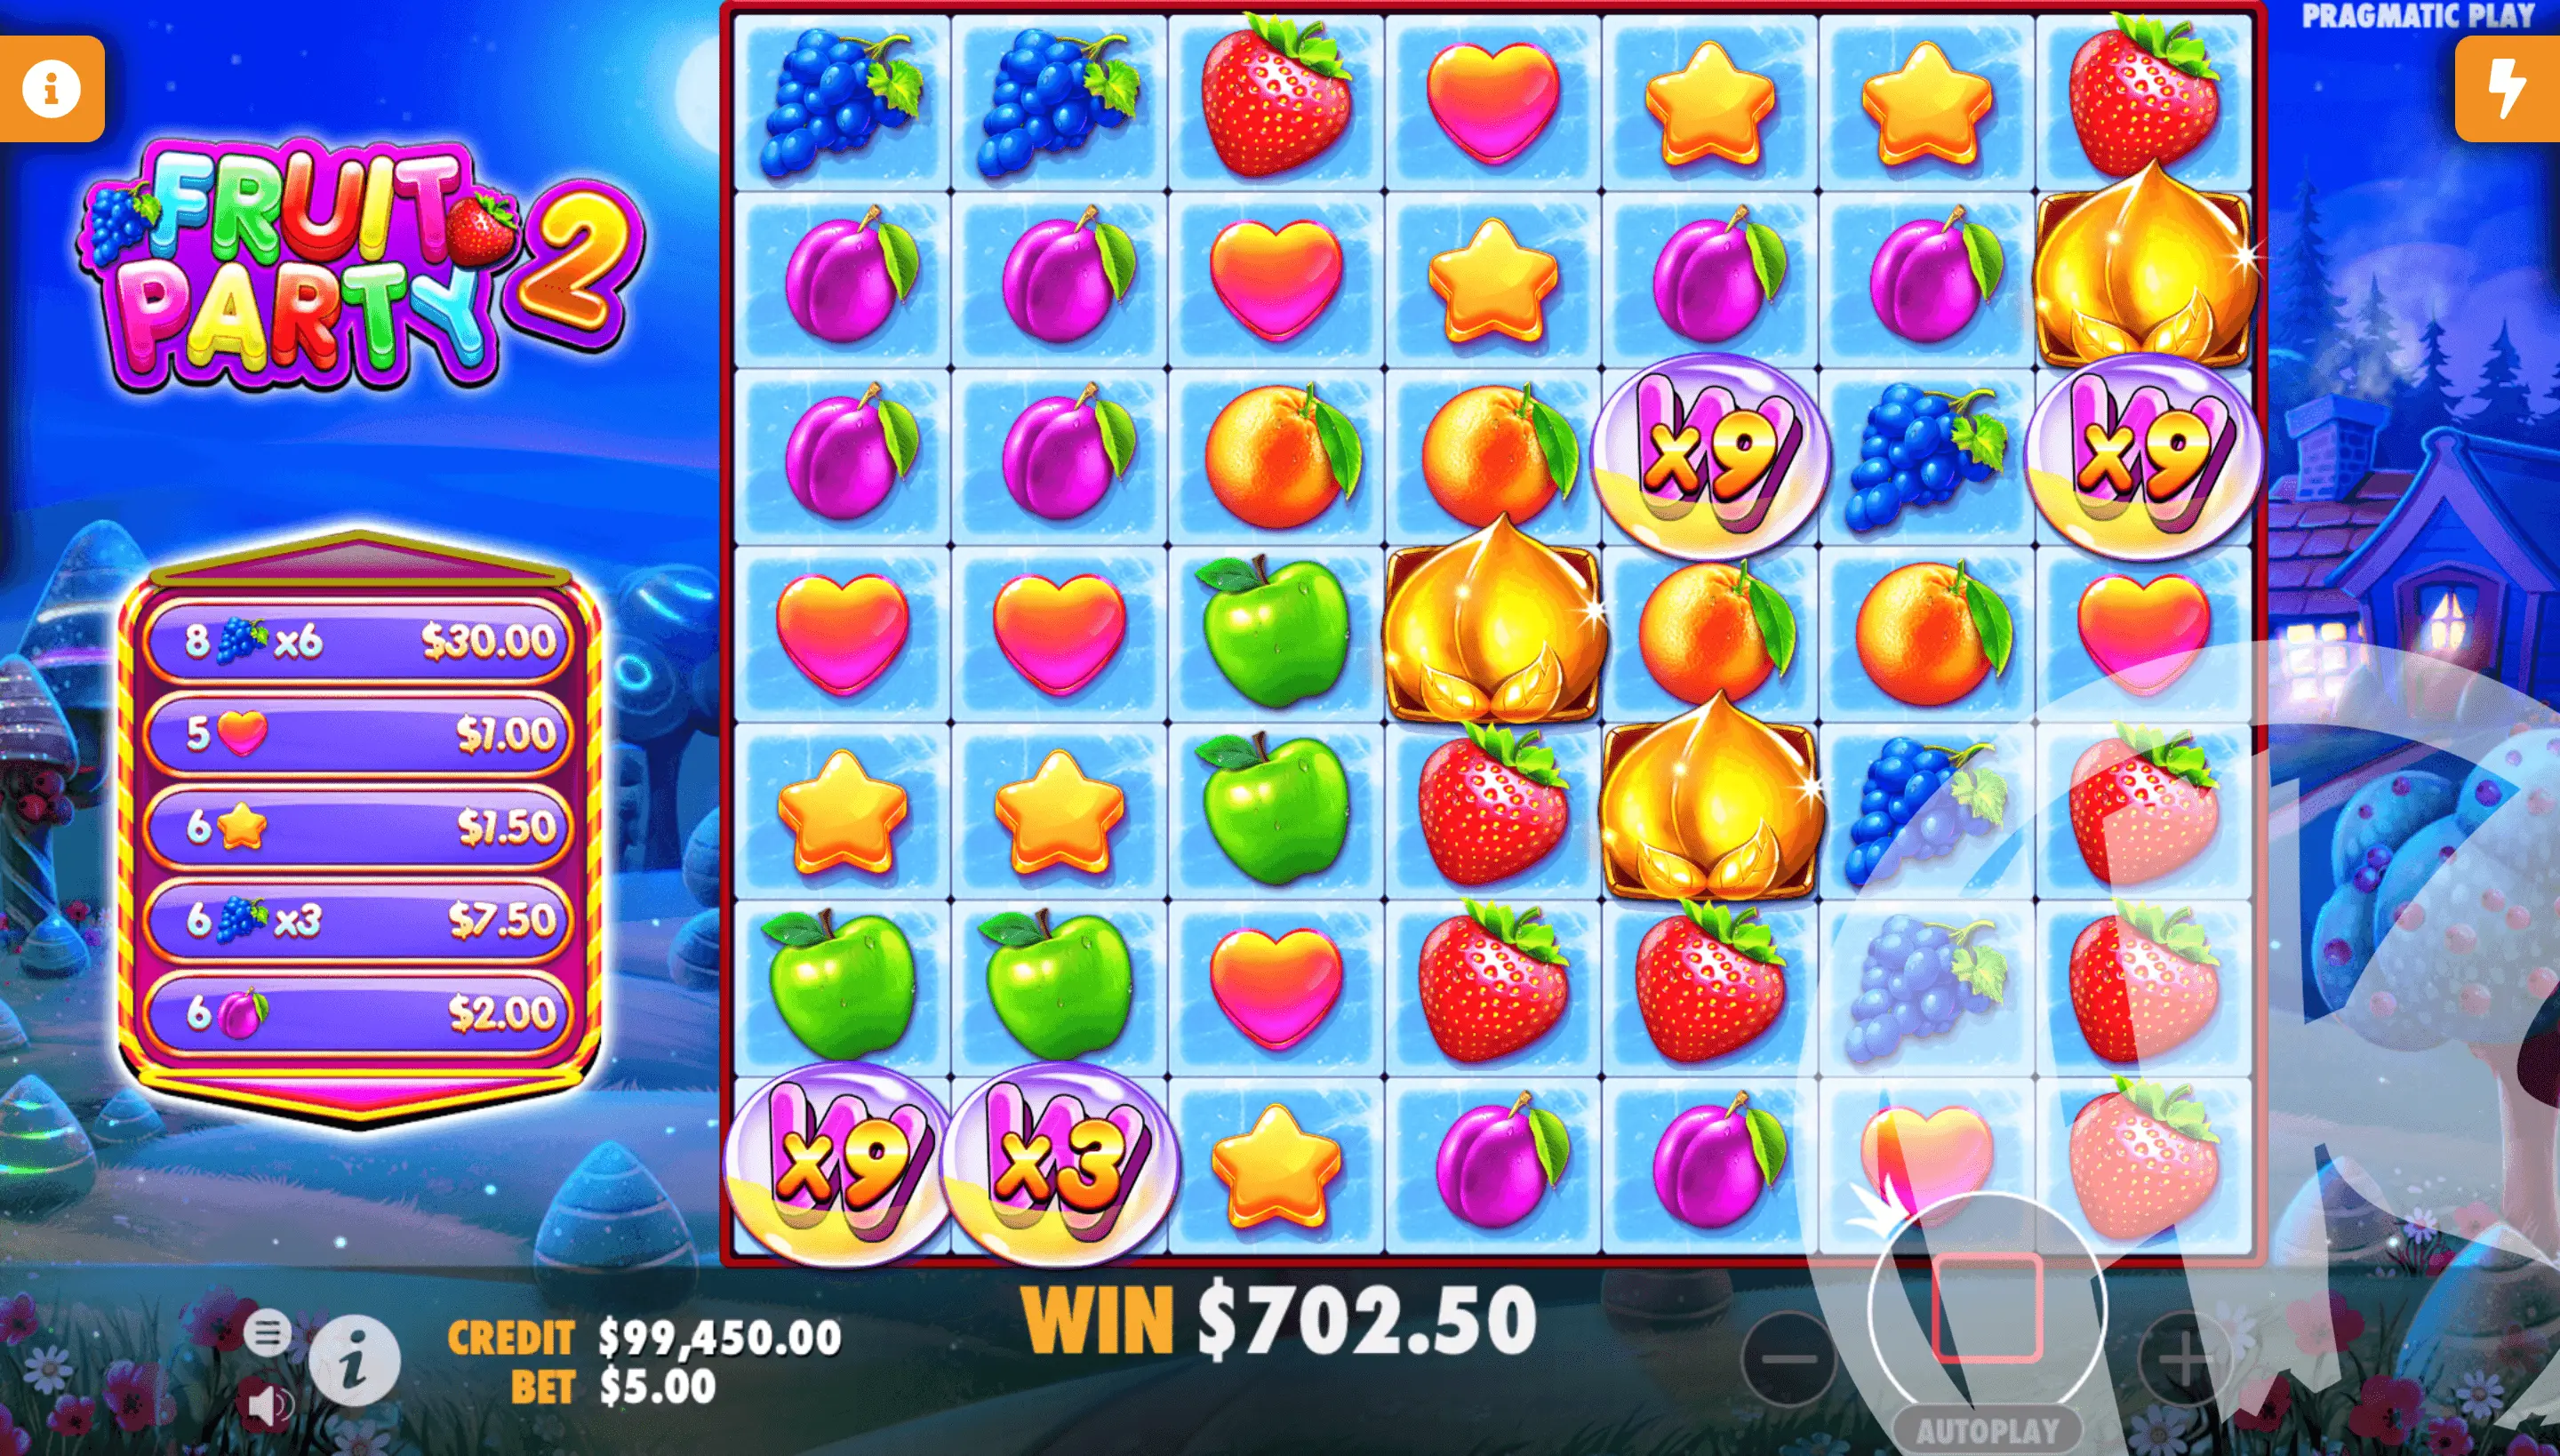 3 Scatters Retriggers Free Spins